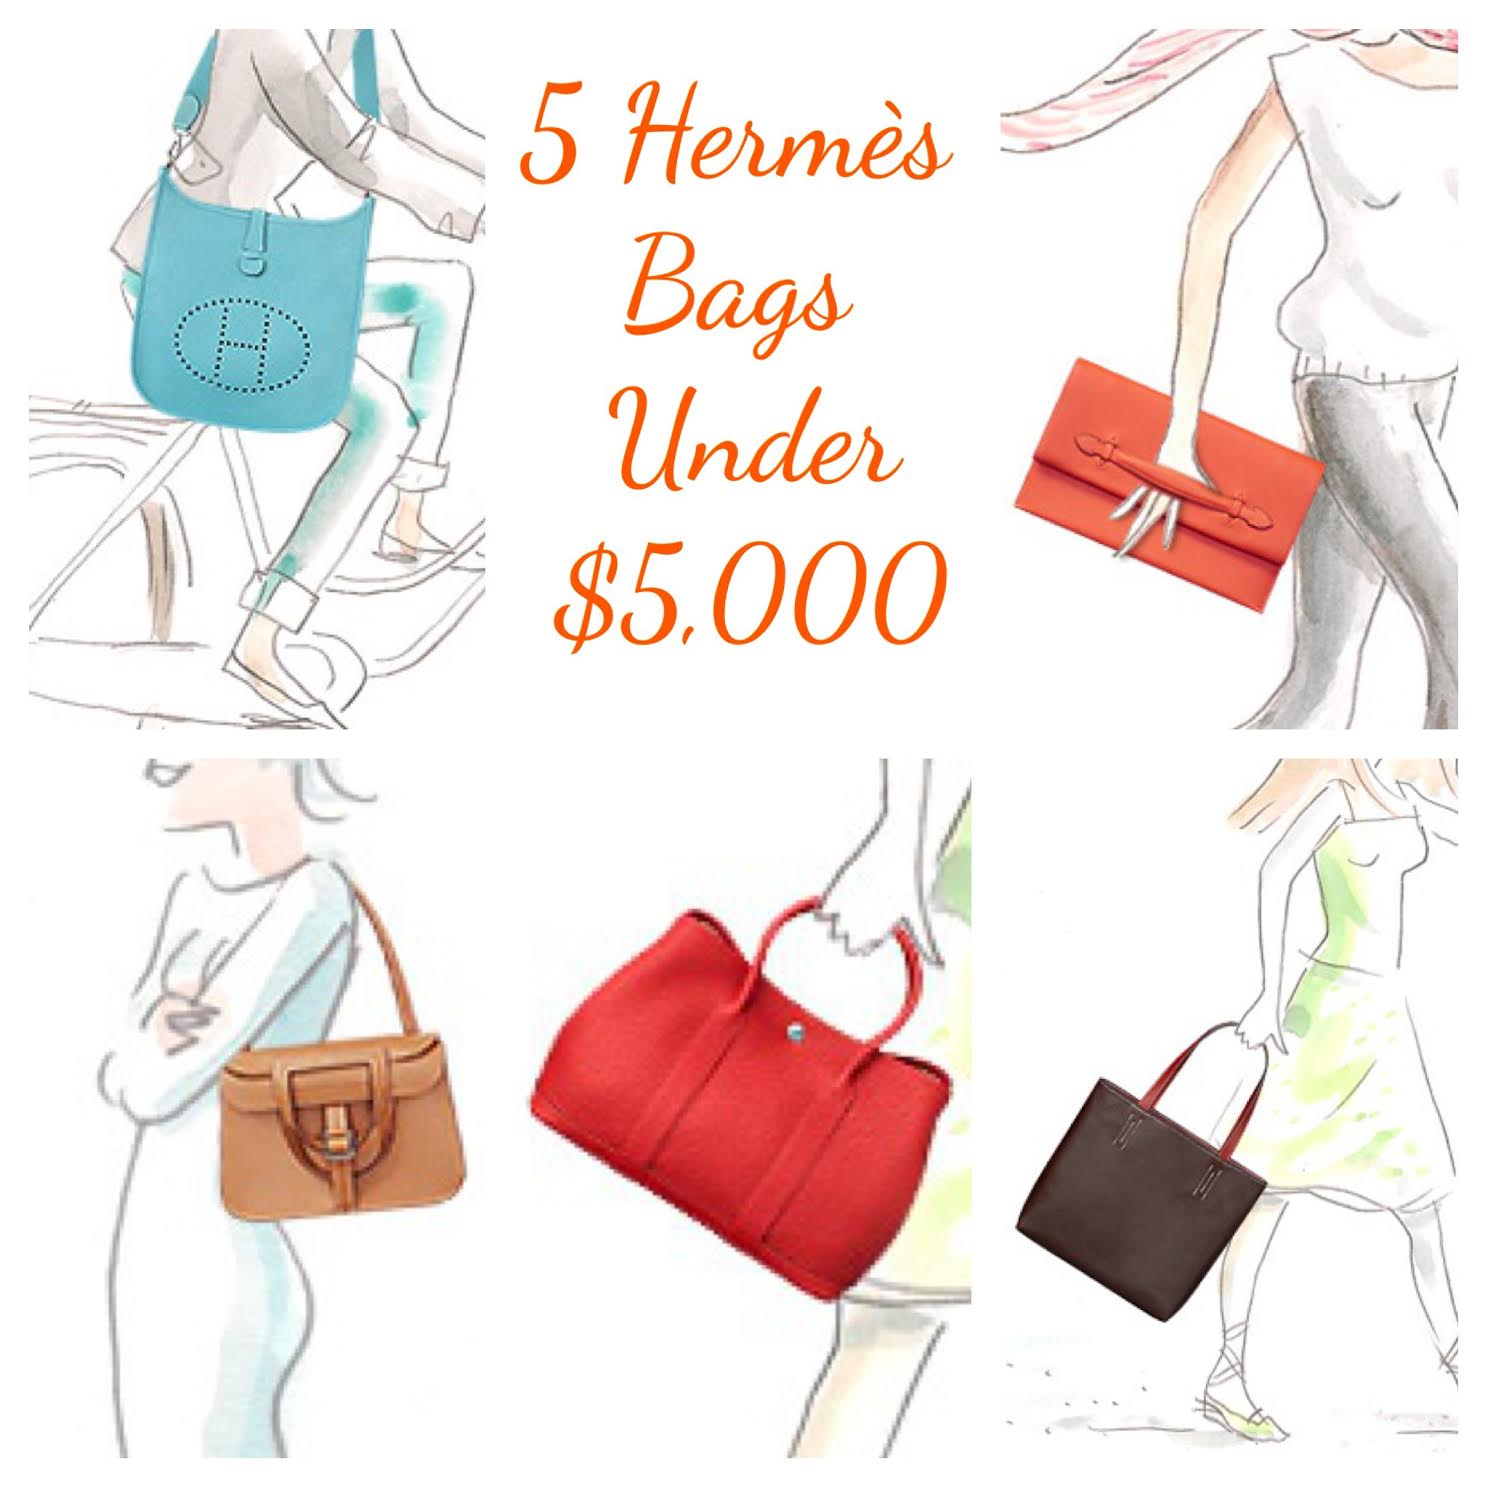 different types of hermes bags